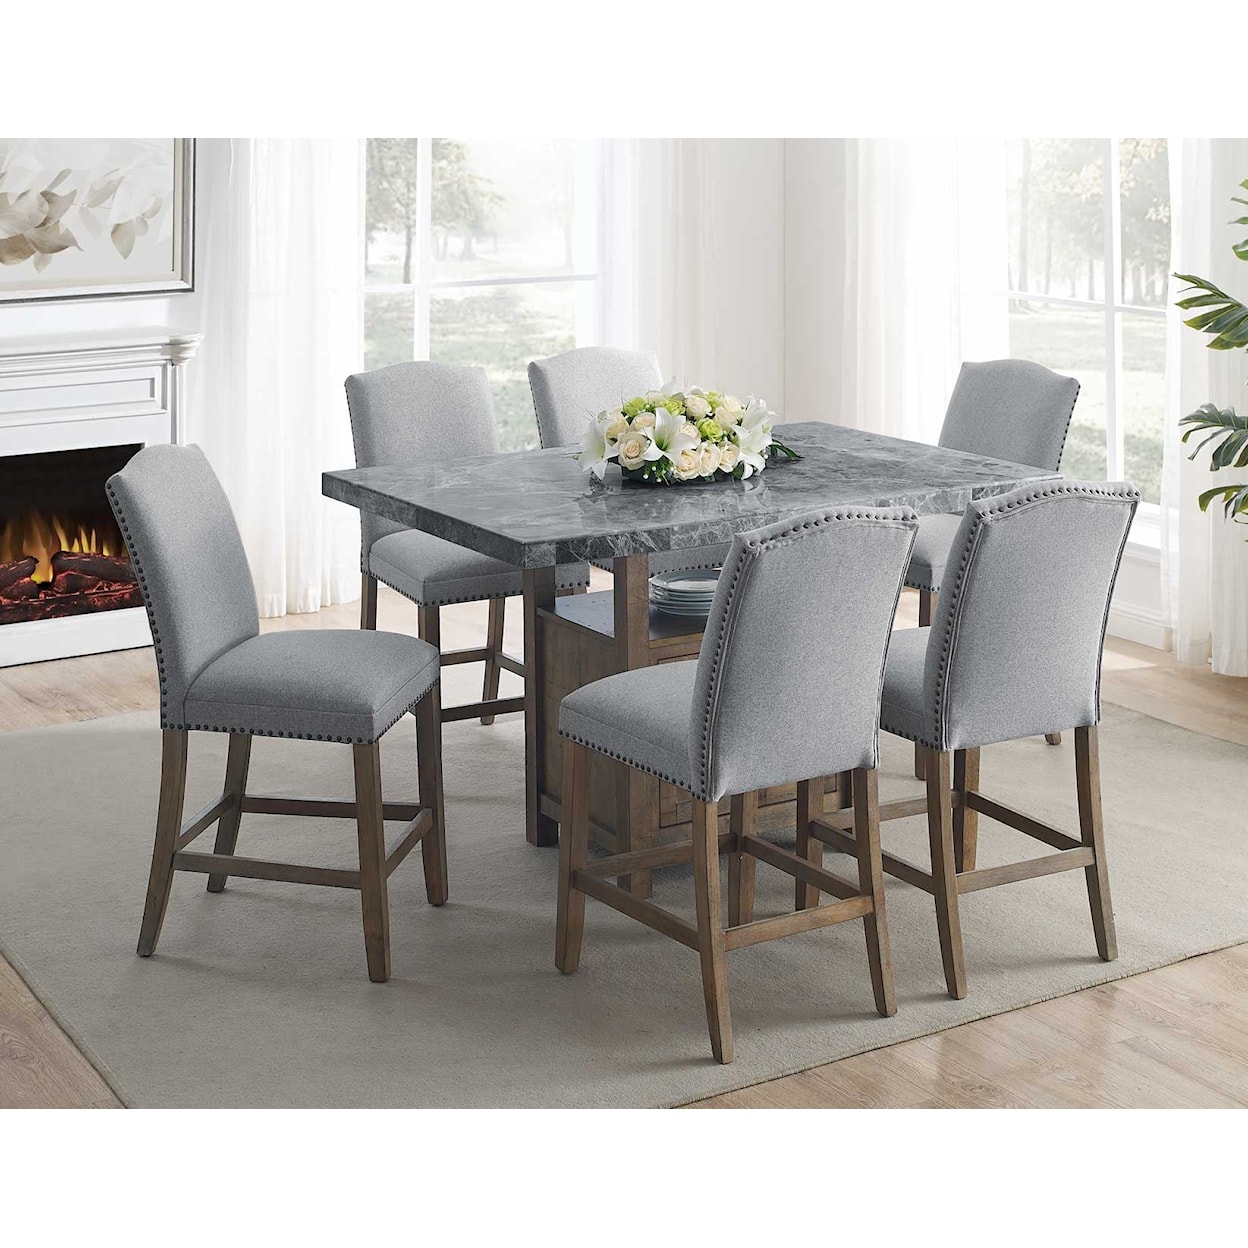 Prime Grayson 7-Piece Counter-Height Dining Set